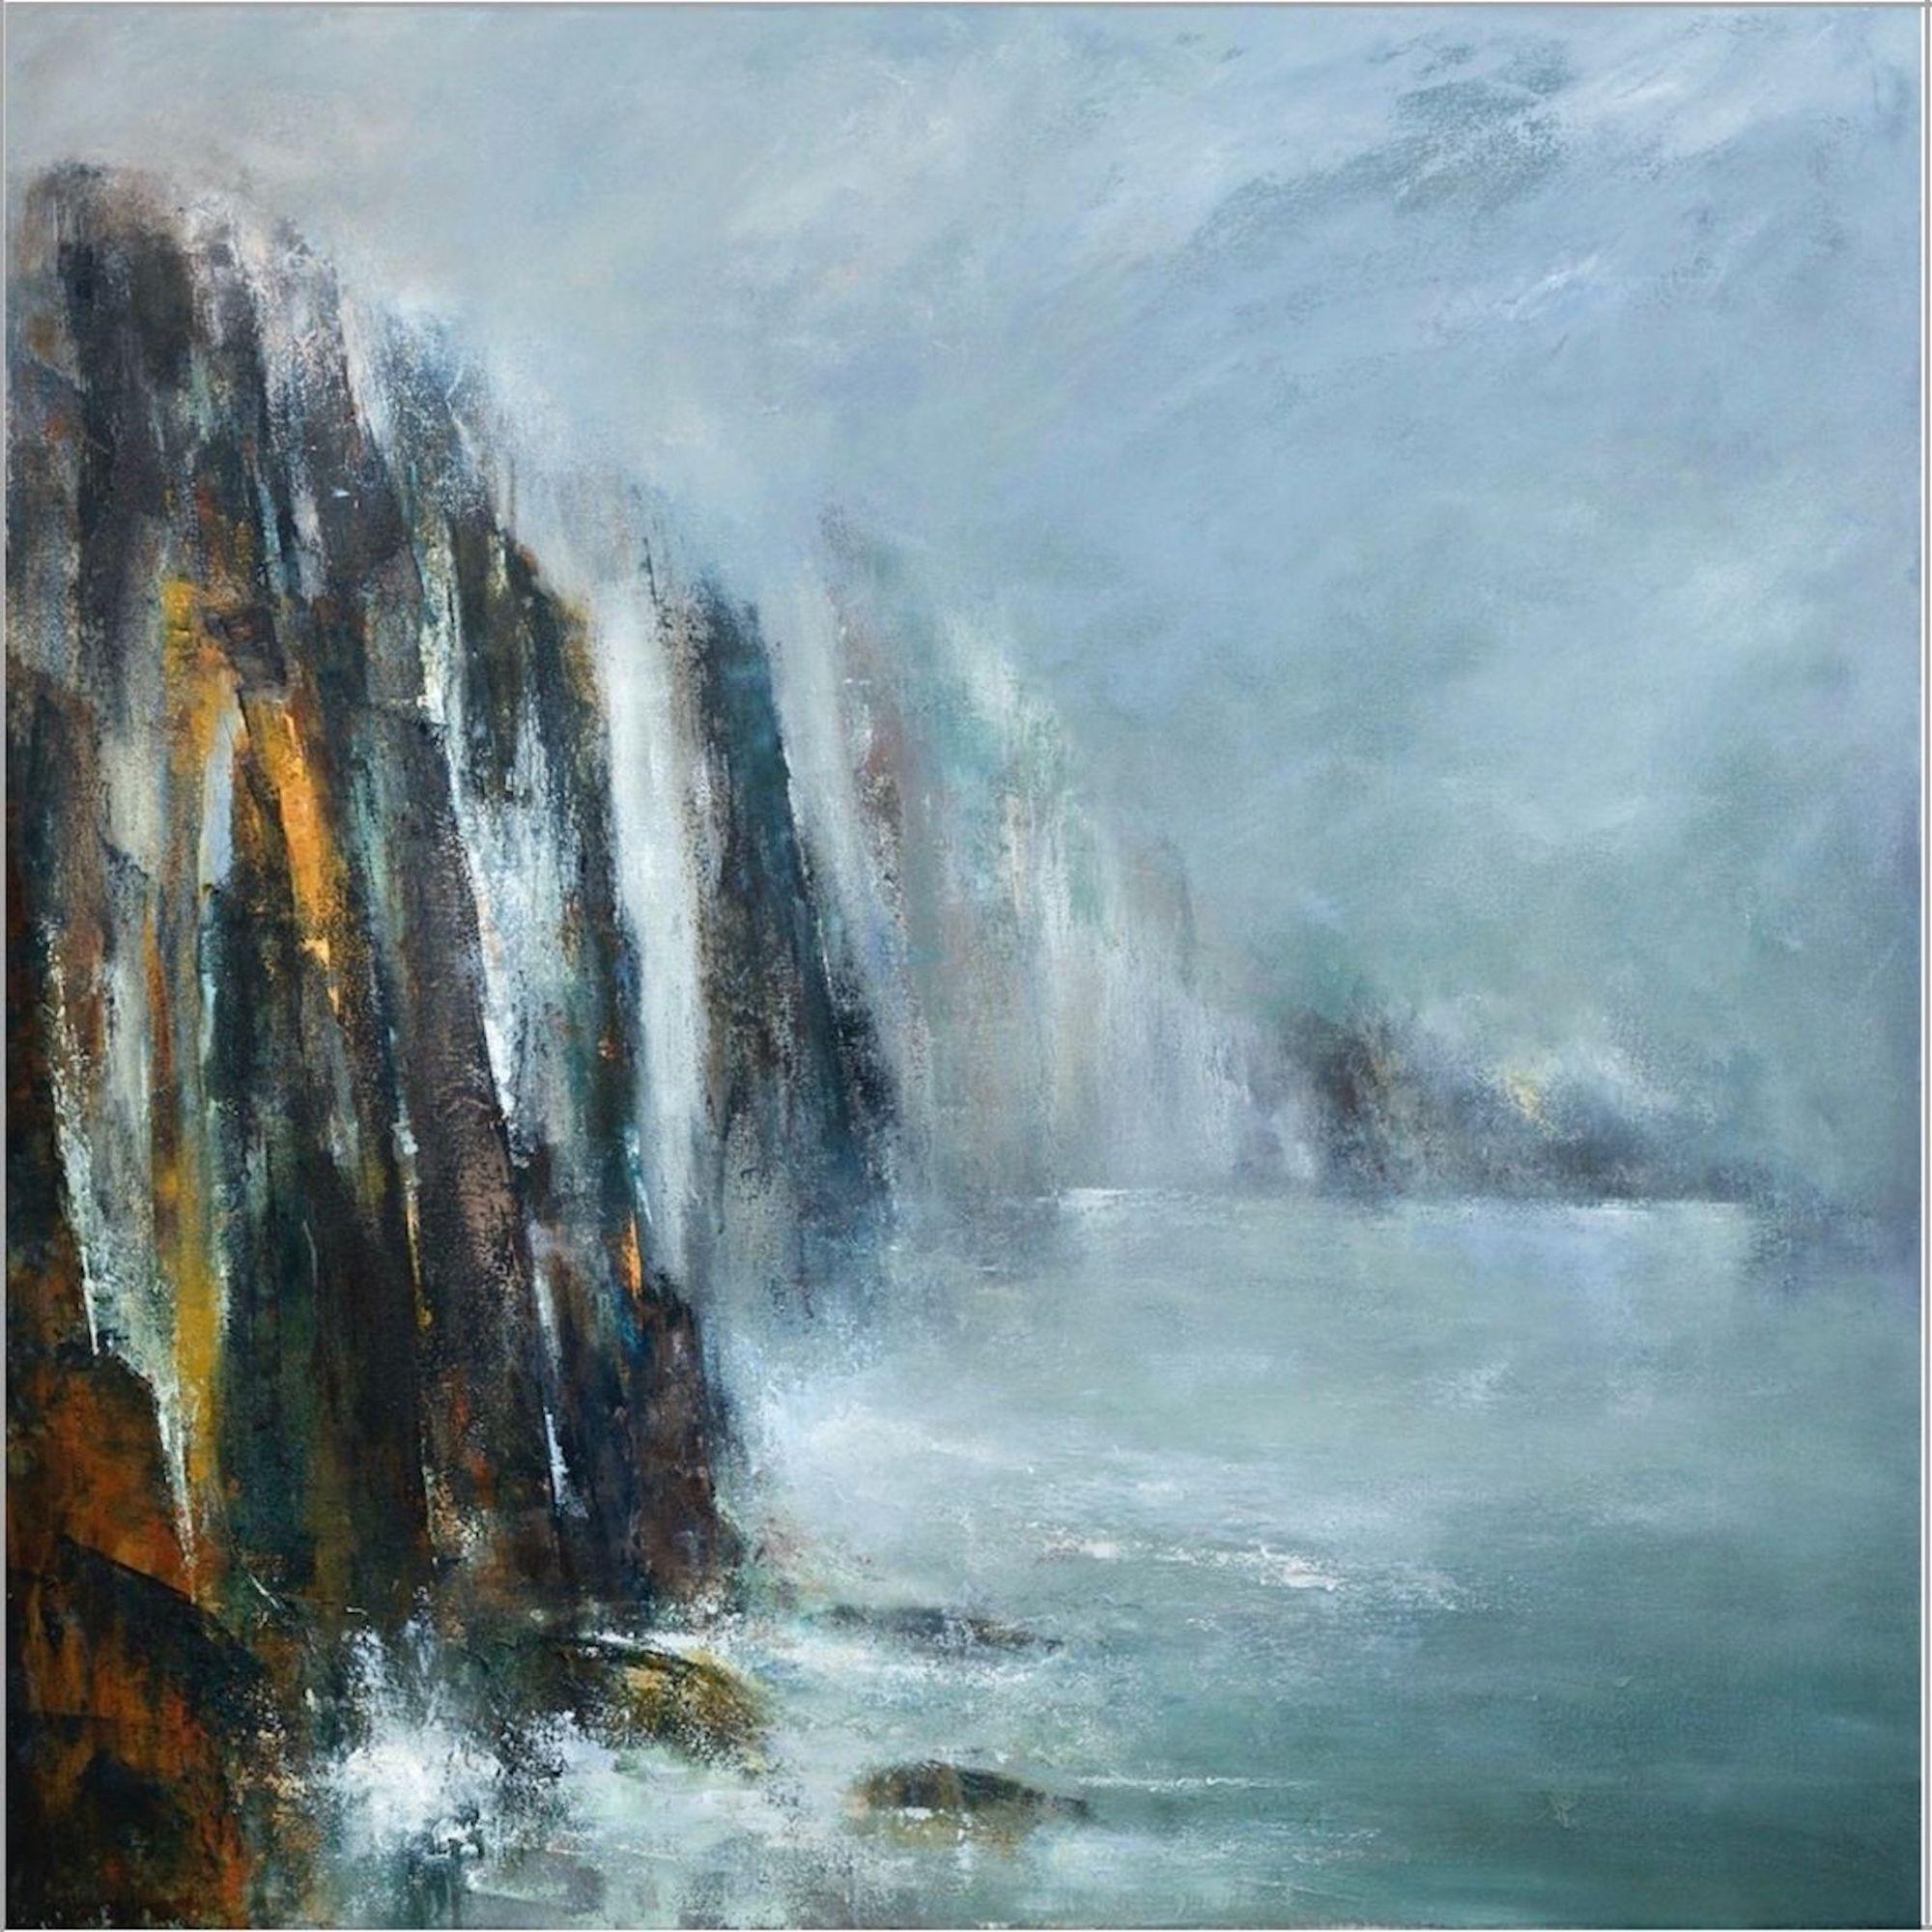 At the Edge by Shirley Kirkcaldy [2018]

This is a superior quality limited edition Giclee print inspired by the coastline near Cape Cornwall. Reproduced from an original mixed media painting, it evokes the atmosphere and drama of this place at the